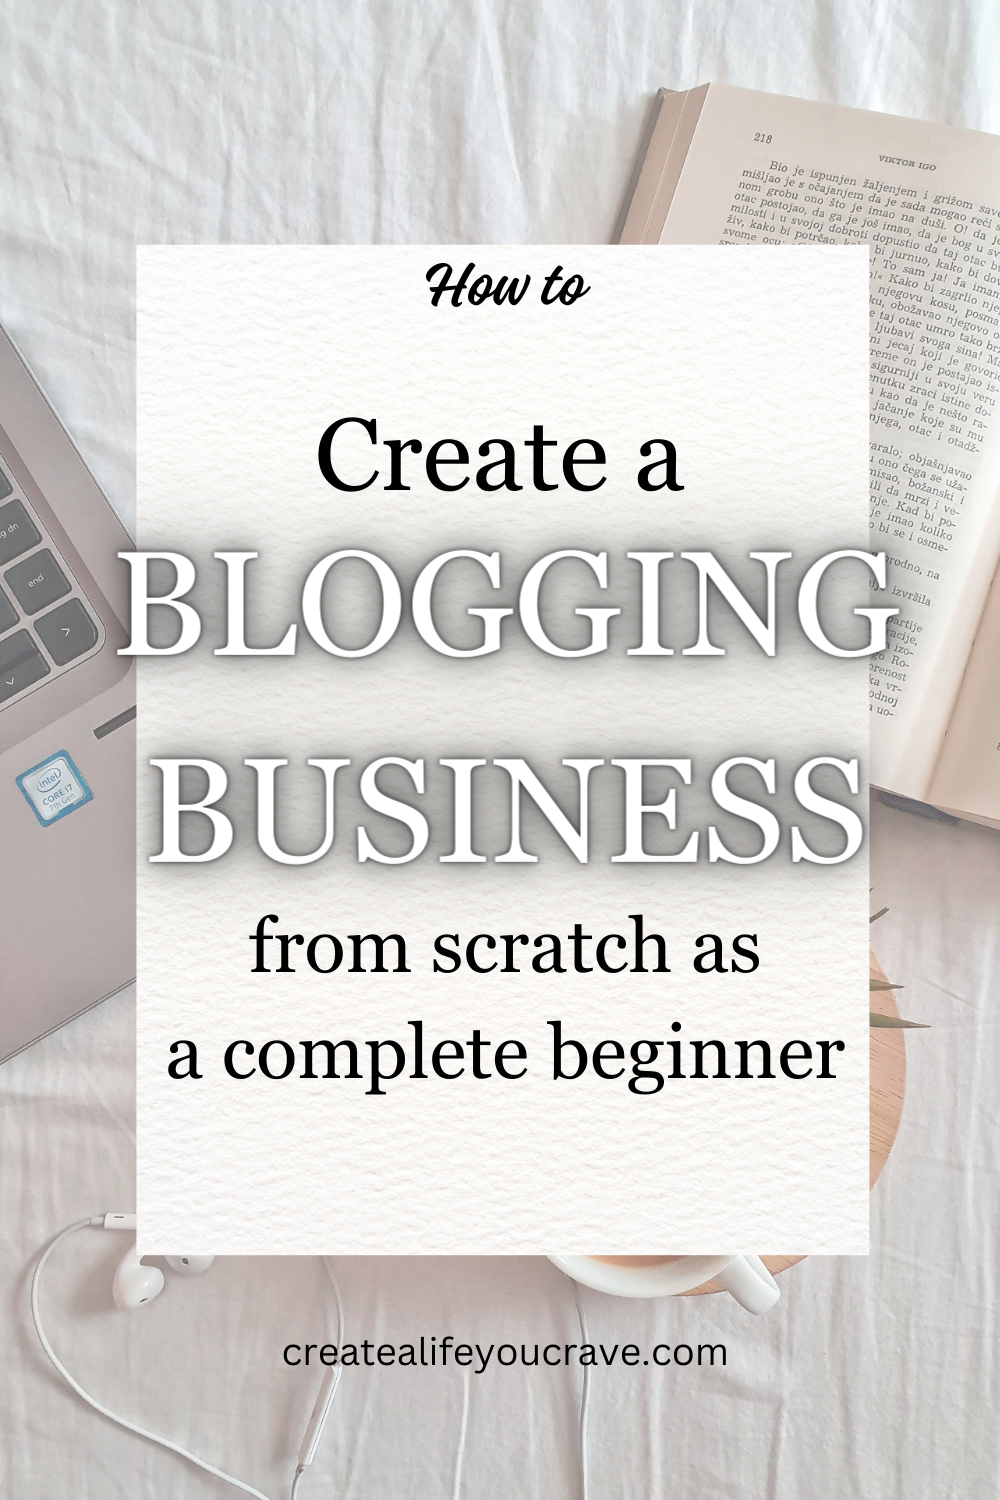 How to Create a Blog from Scratch as a Complete Beginner